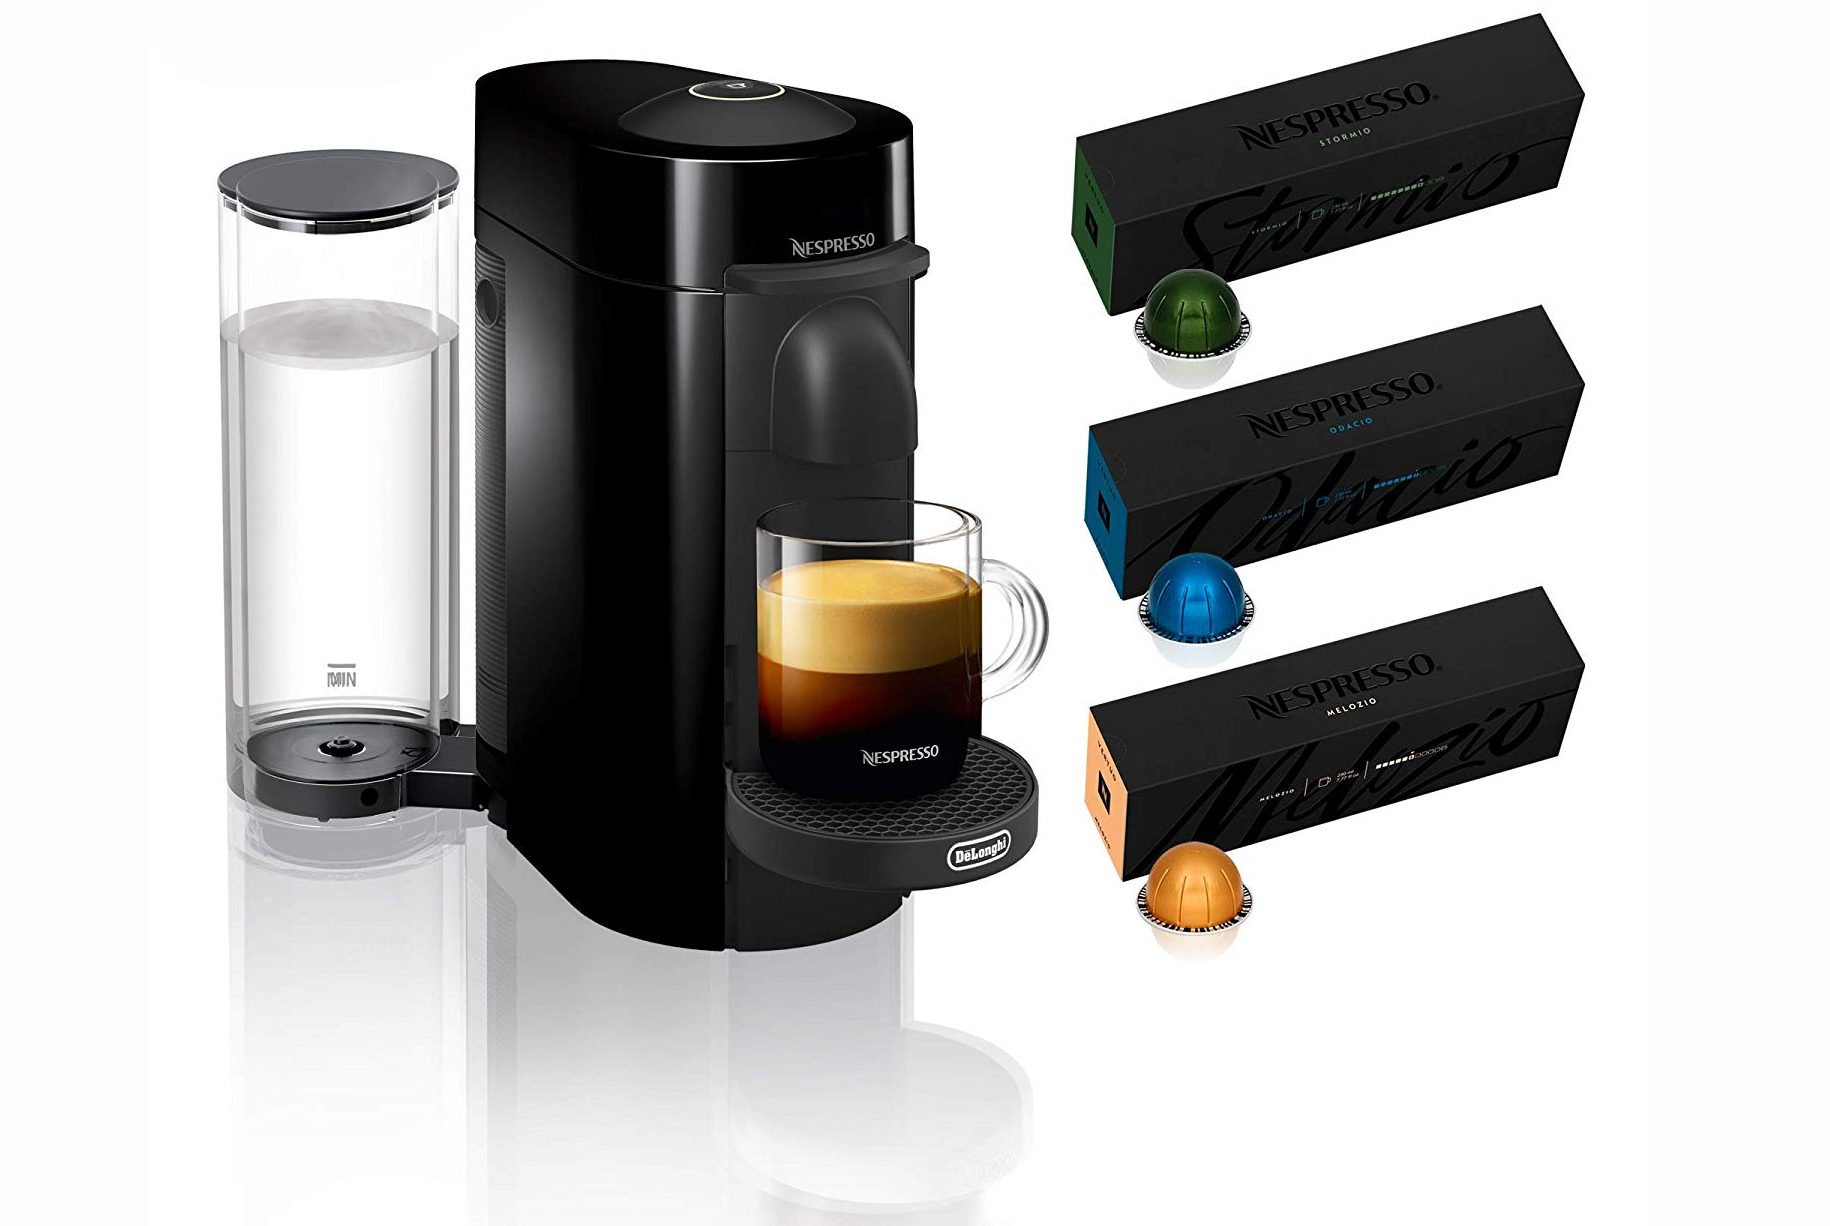 https://www.digitaltrends.com/wp-content/uploads/2019/12/nespresso-vertuoplus-coffee-and-espresso-machine-in-ink-black-by-delonghi-bundled-with-30-best-selling-coffee-samples-1.jpg?fit=720%2C482&p=1